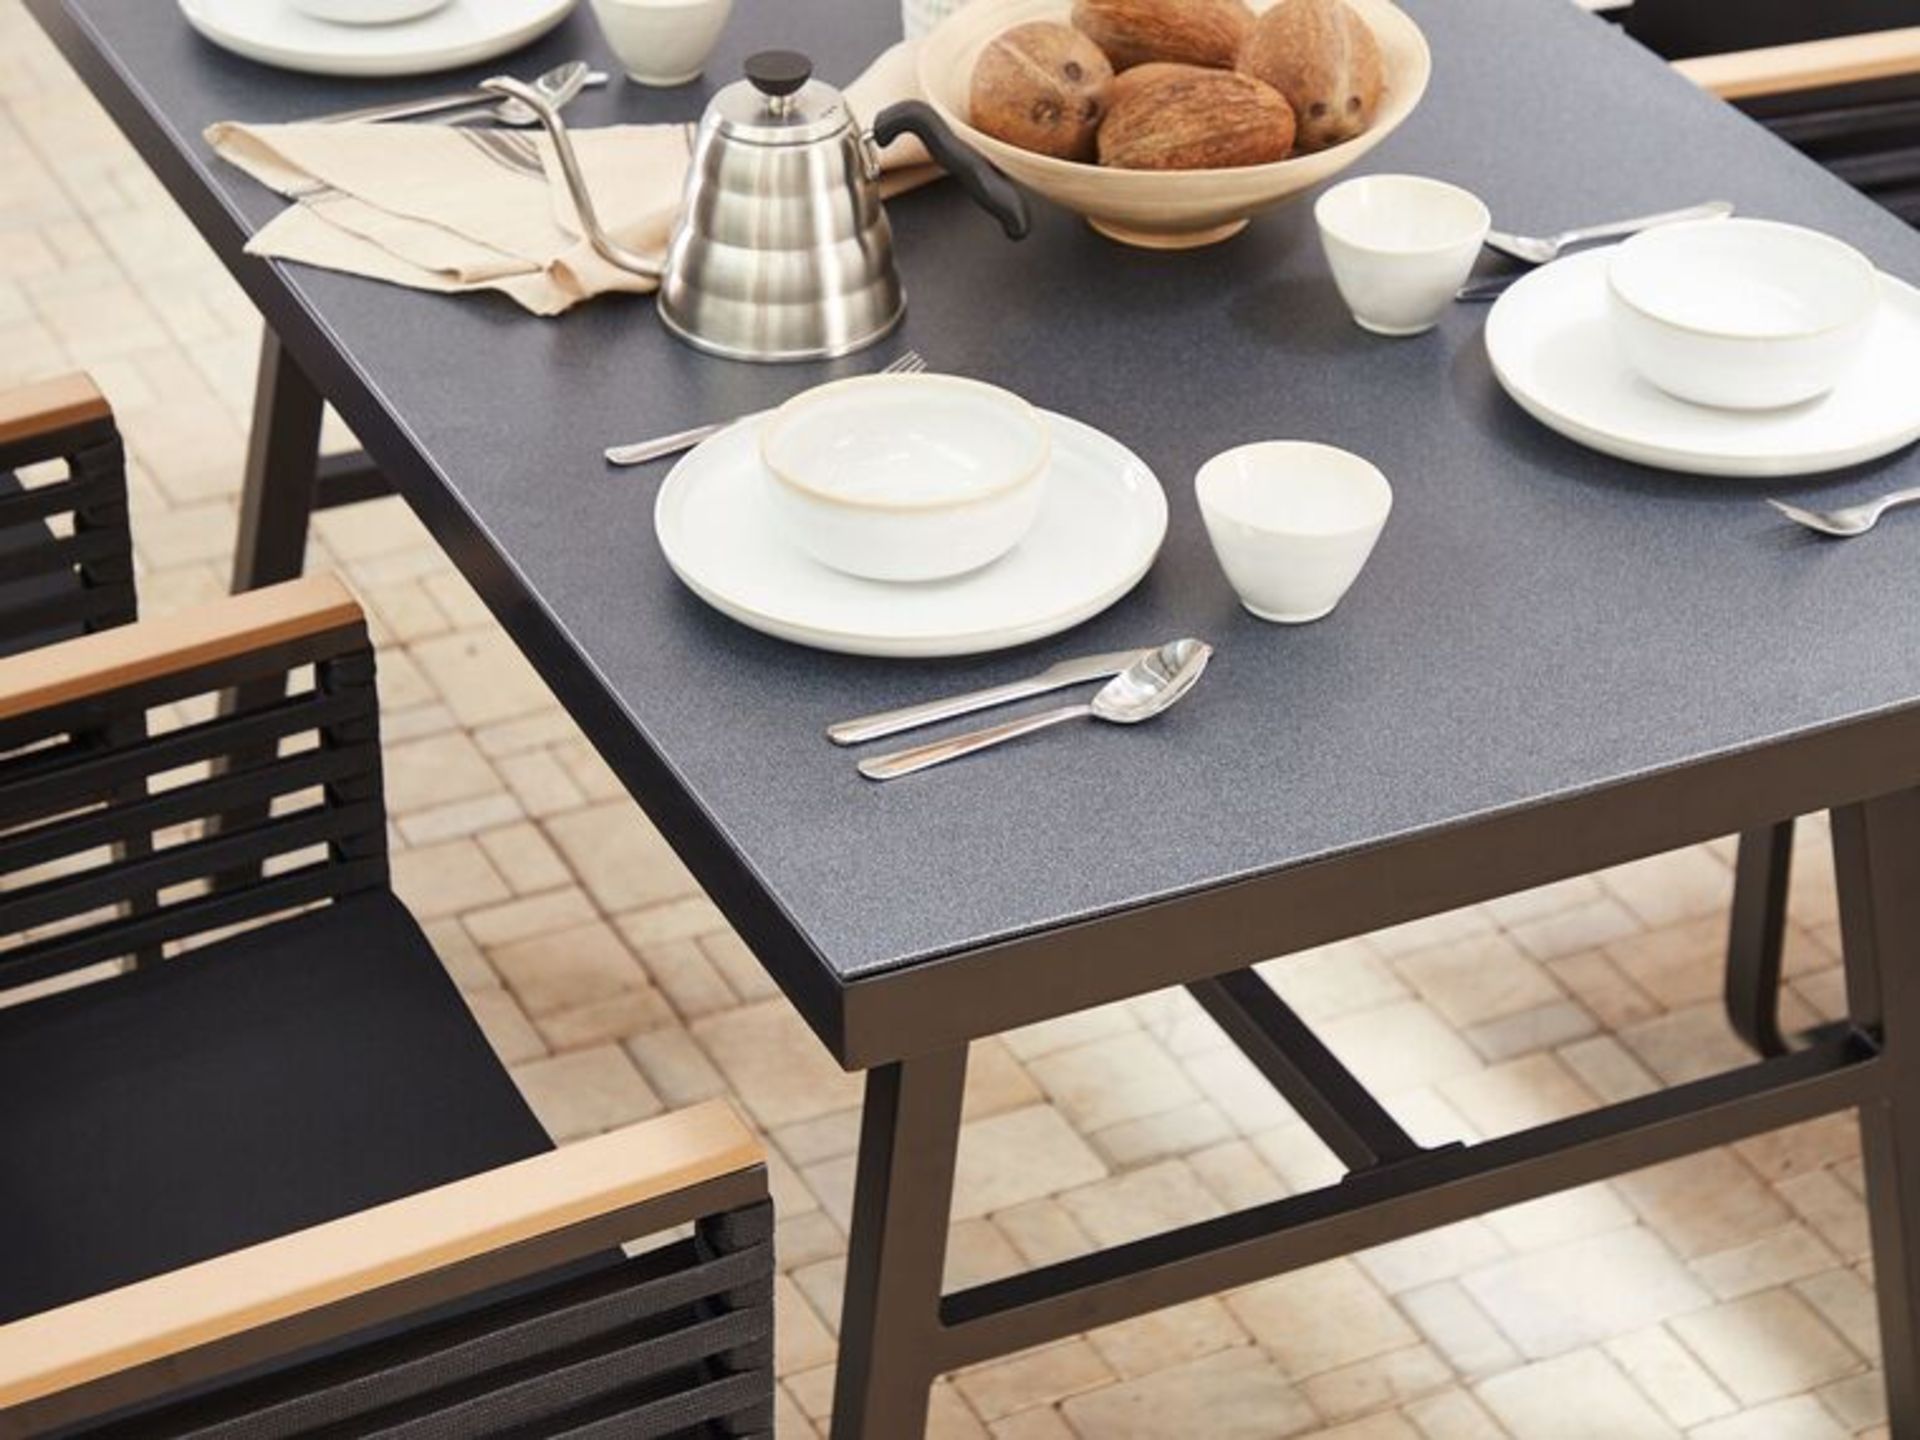 Canetto Metal Garden Dining Table 150 x 90 cm Black. - R14.8. RRP £429.99. This modern table in - Bild 2 aus 2